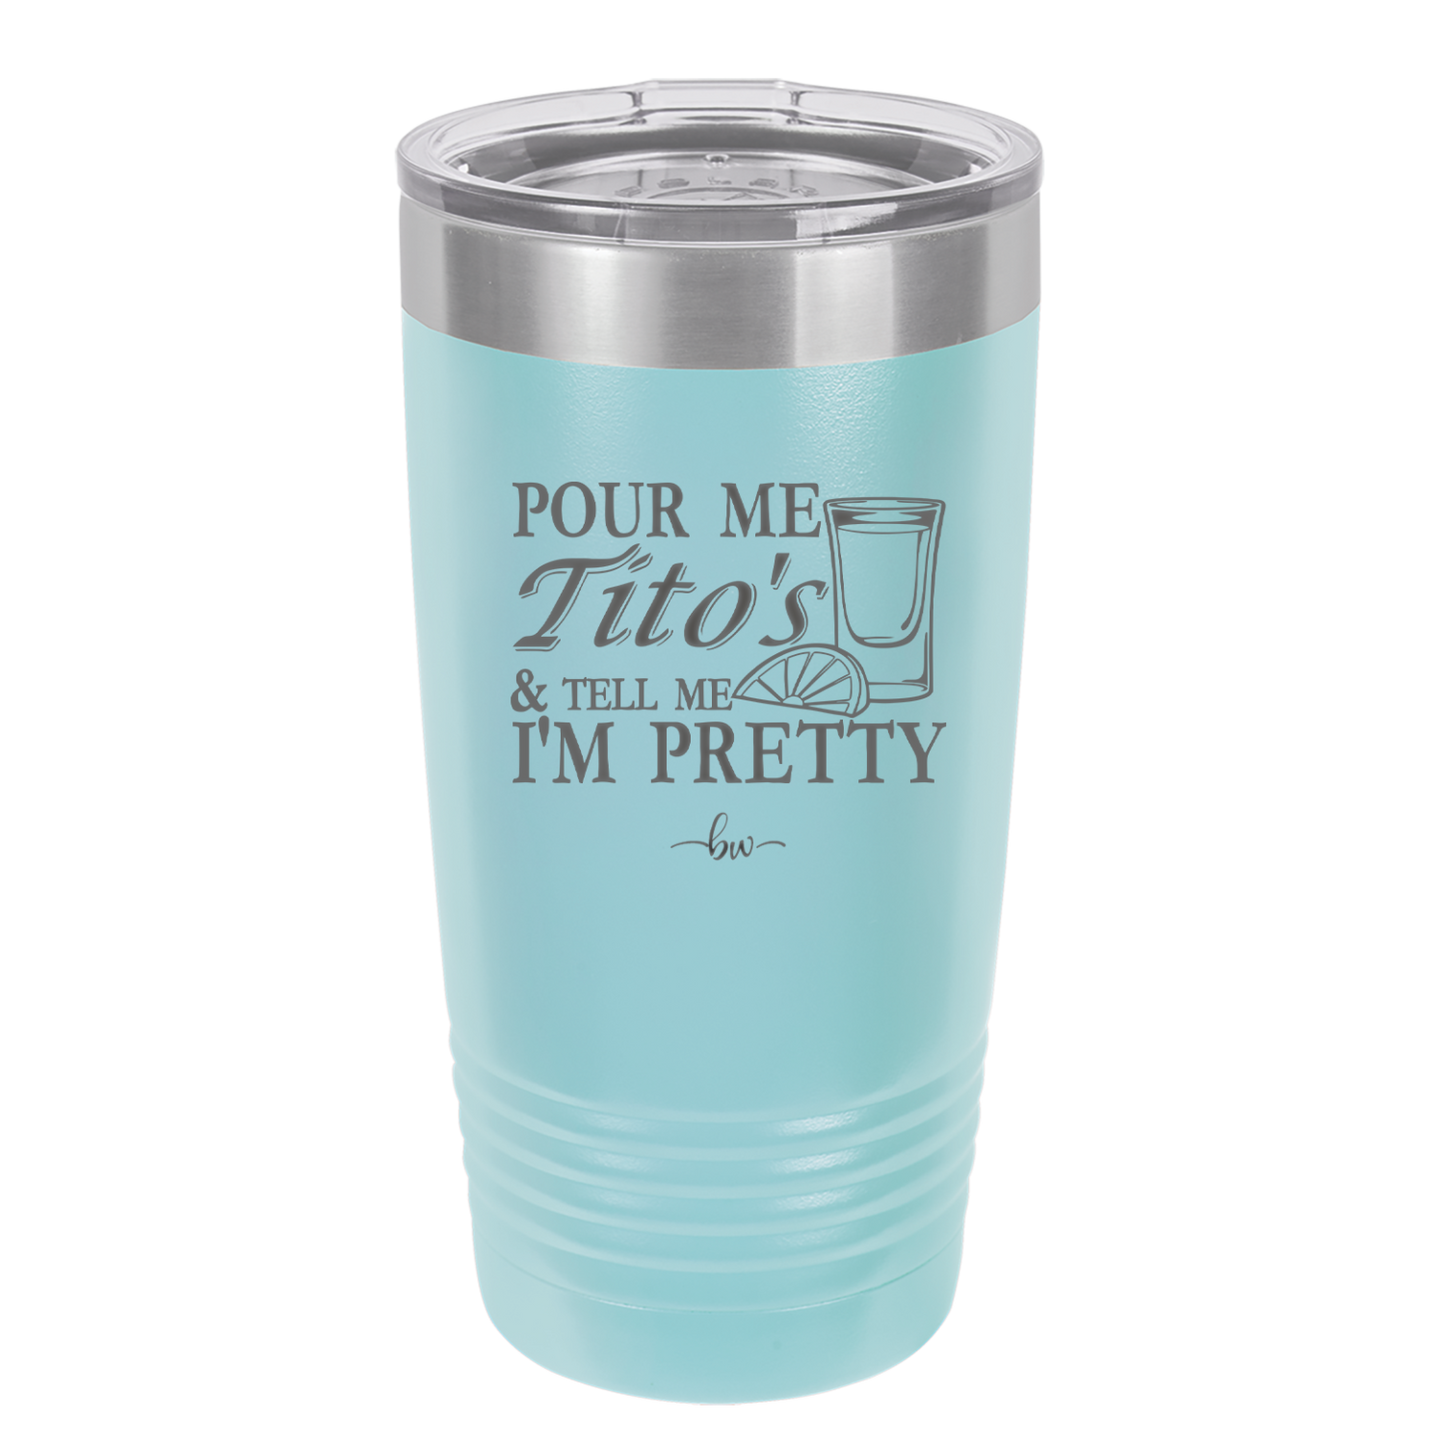 Pour Me Tito's and Tell Me I'm Pretty - Laser Engraved Stainless Steel Drinkware - 2503 -